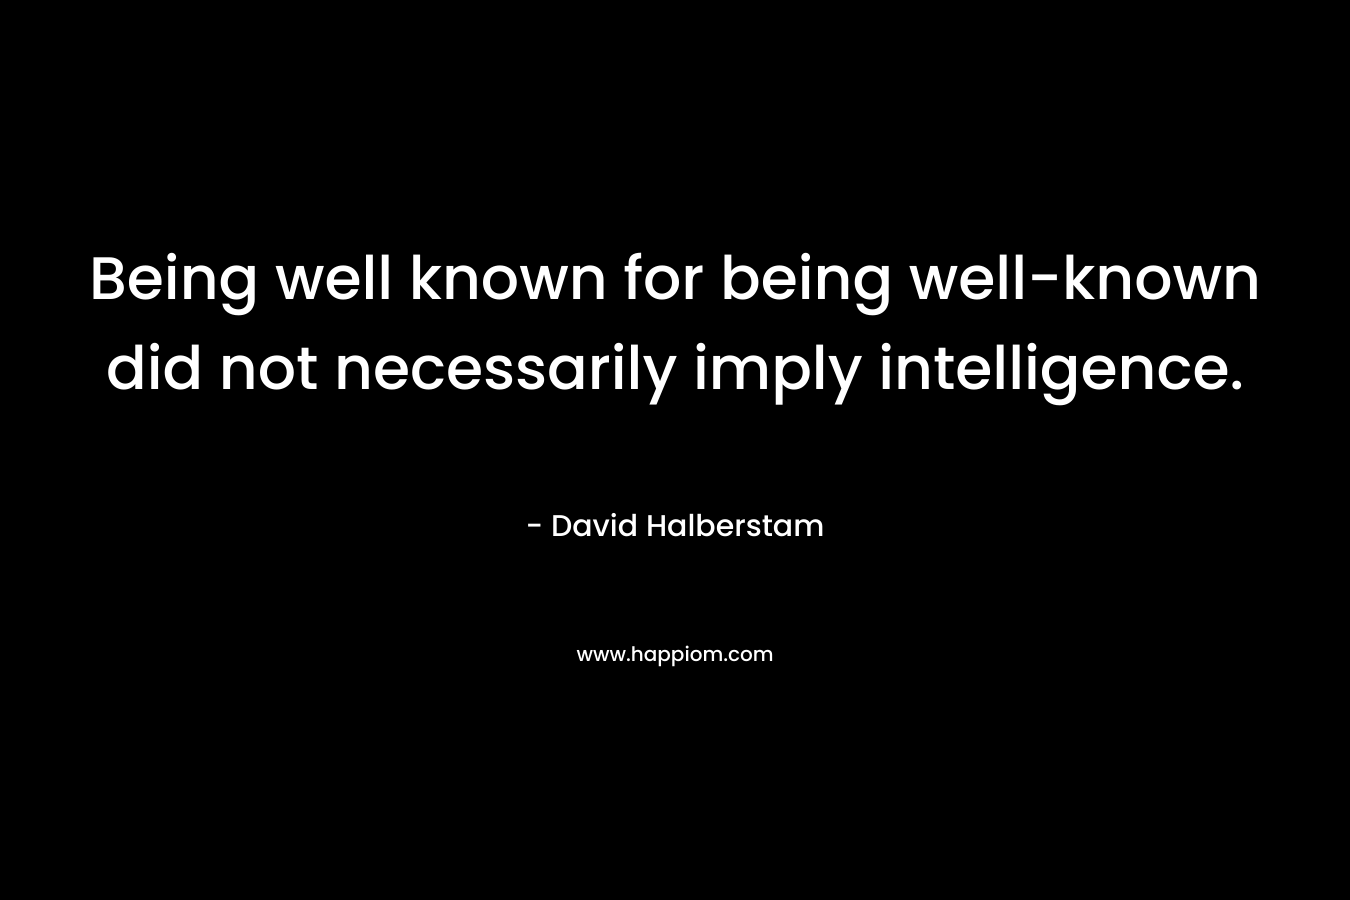 Being well known for being well-known did not necessarily imply intelligence.